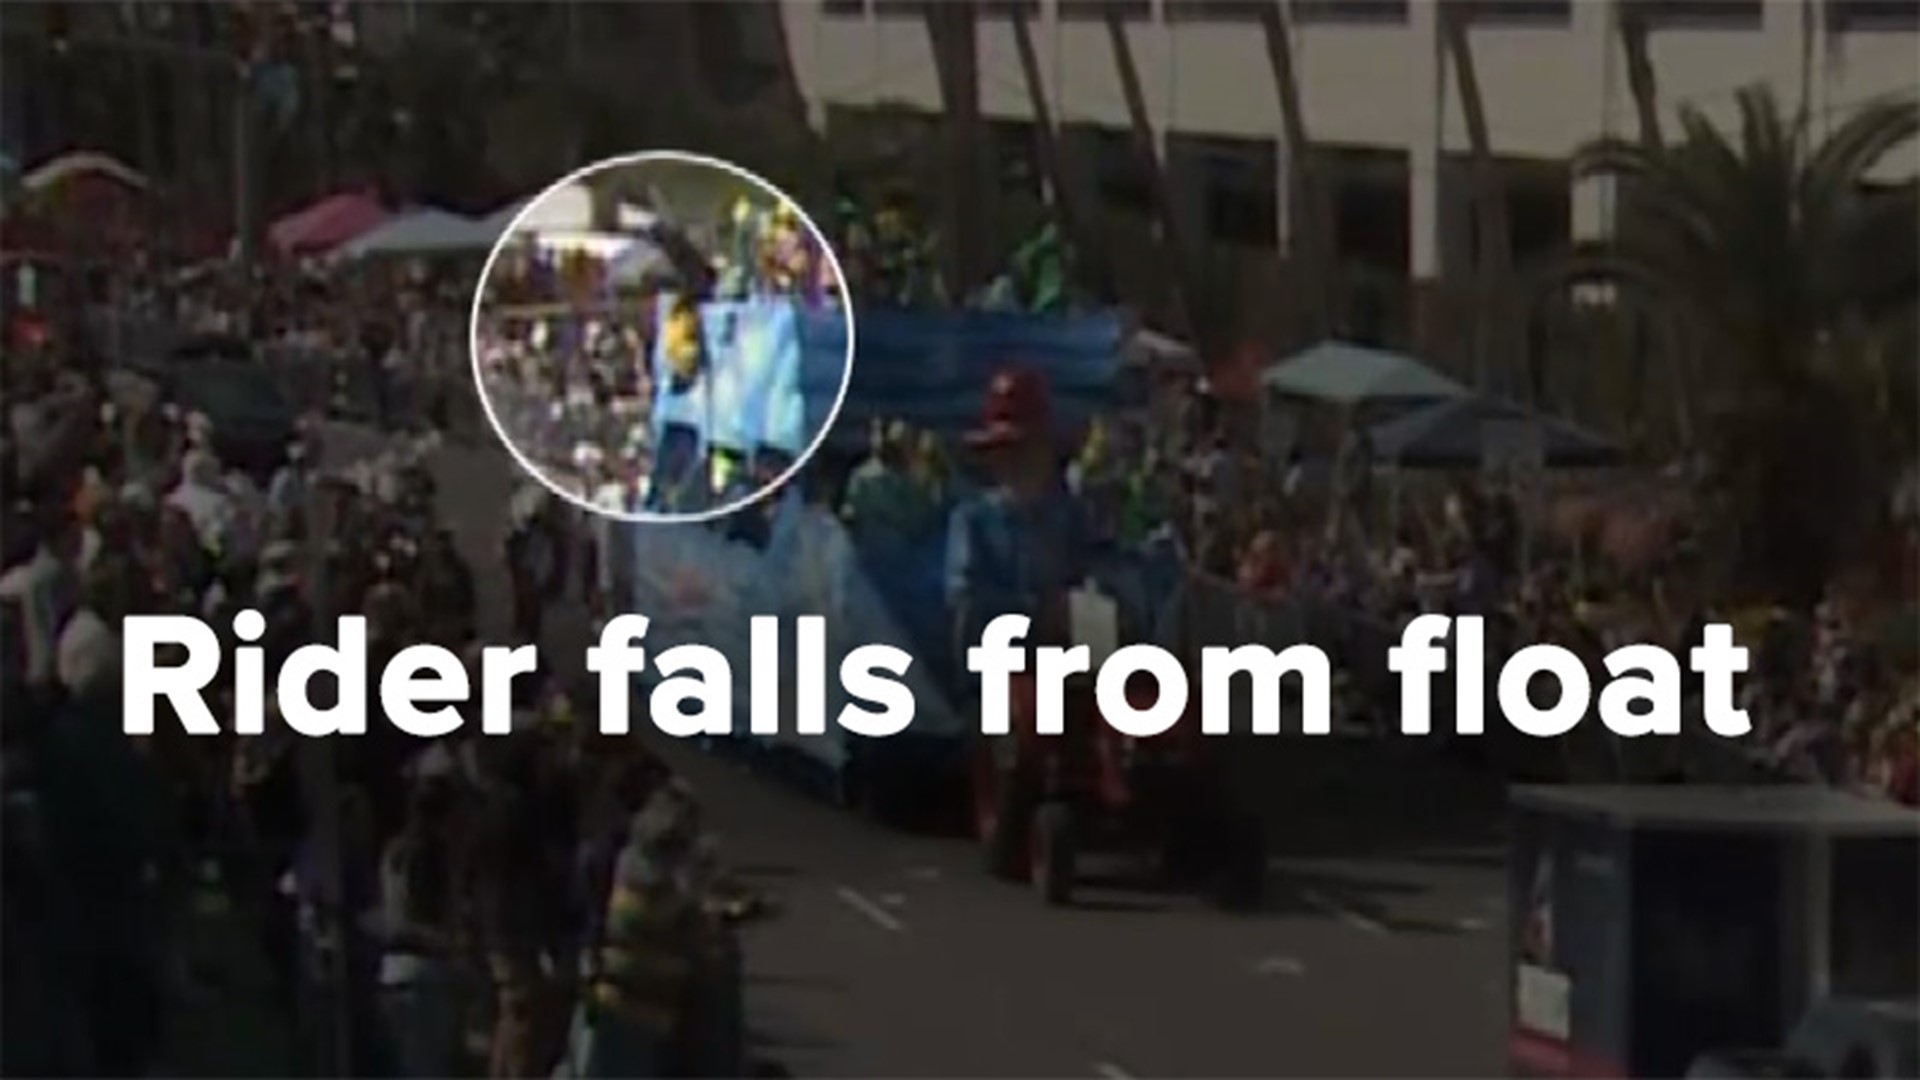 In a video captured by a WWL Louisiana photographer, a Krewe of Argus rider stood up on his own after apparently falling off a float.